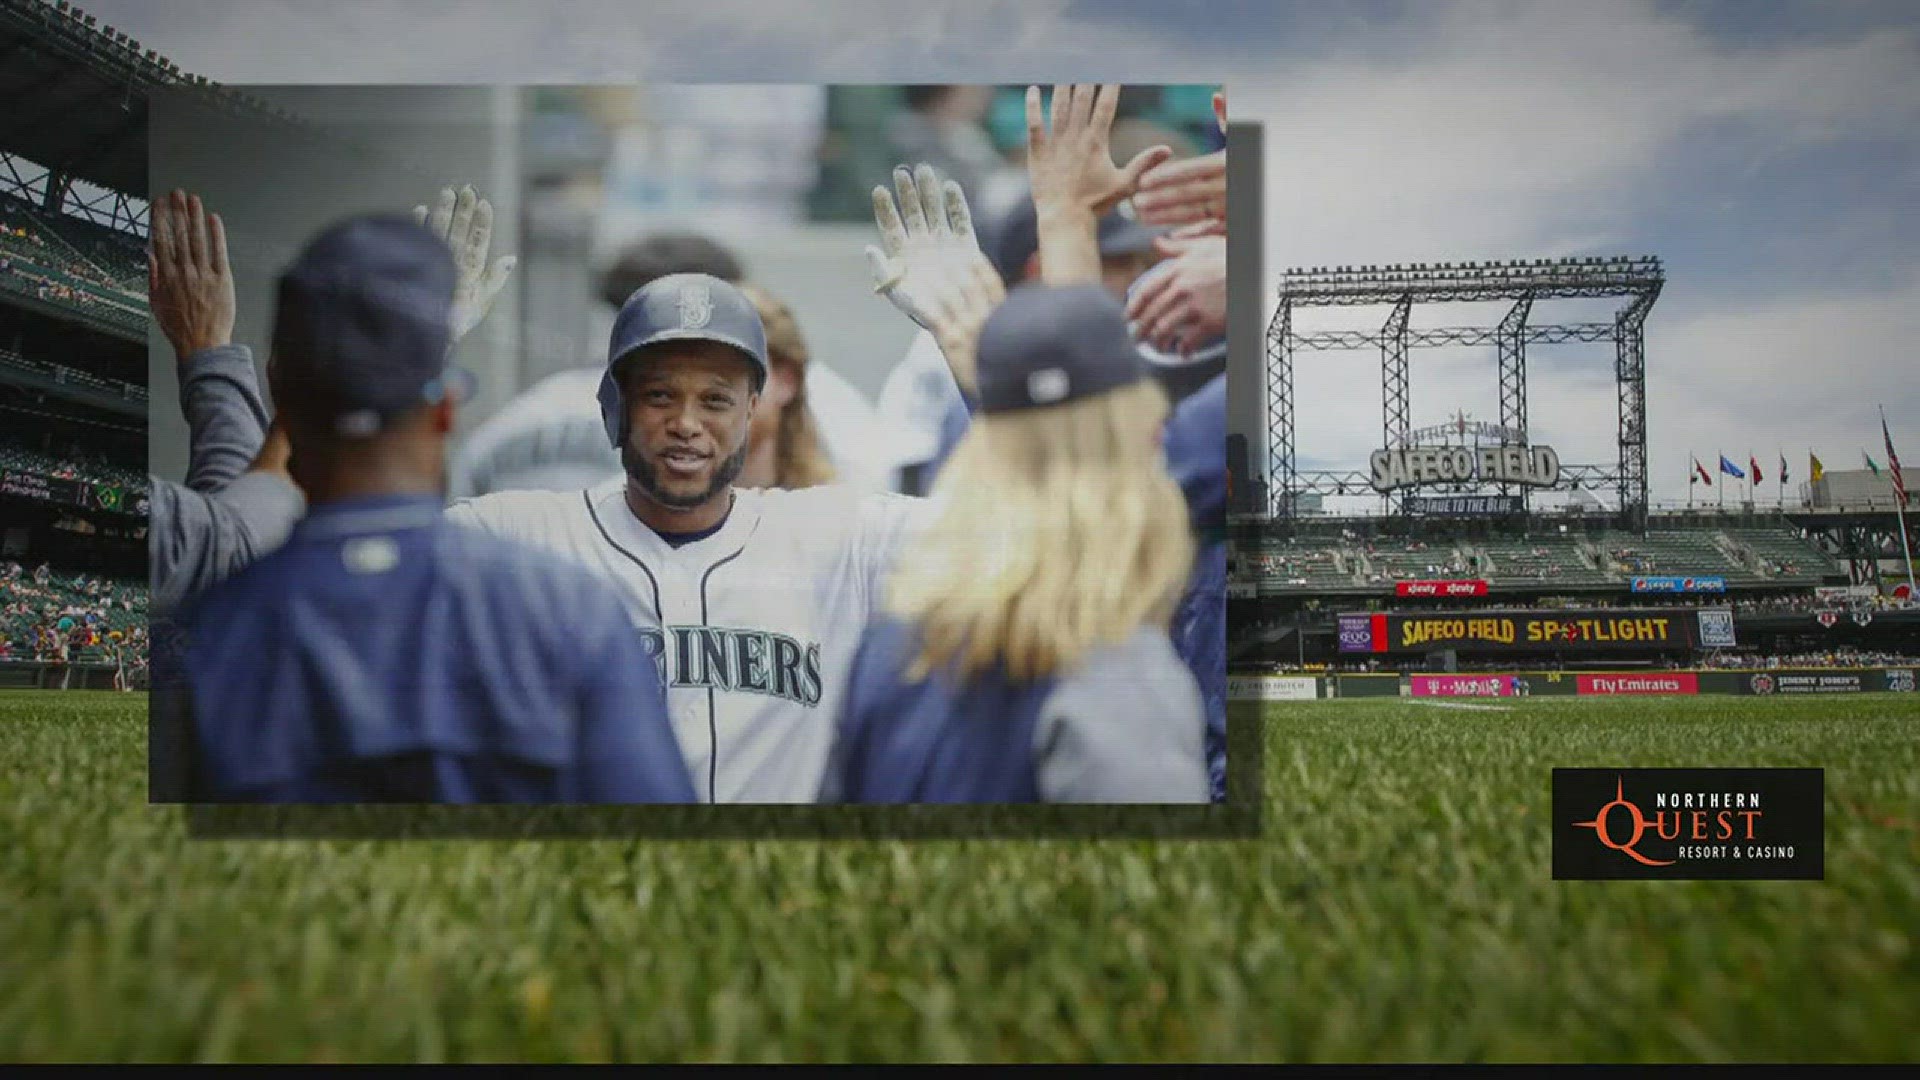 Evan Closky breaks down the first half of Seattle's season, and looks ahead to the second - asking the question, 'do the Mariners have a shot at the playoffs in 2017?'